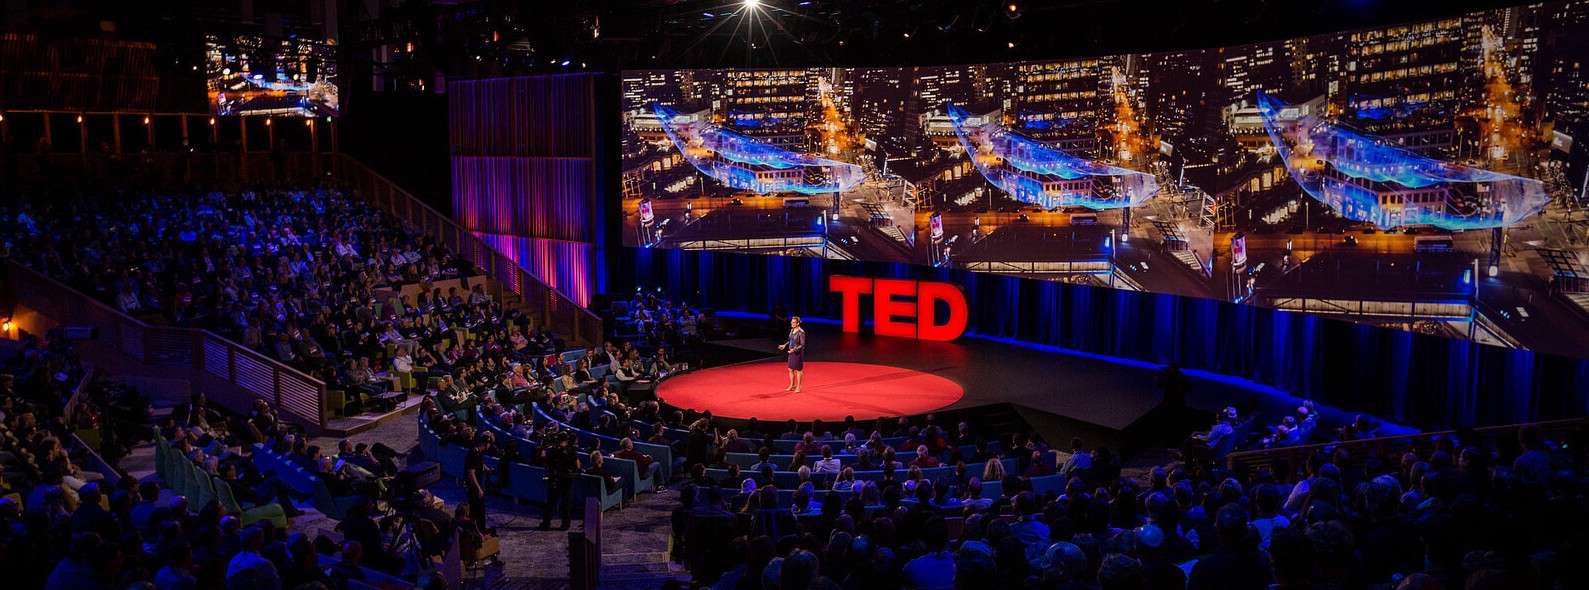 TED2017: My expectations for “The Future You”